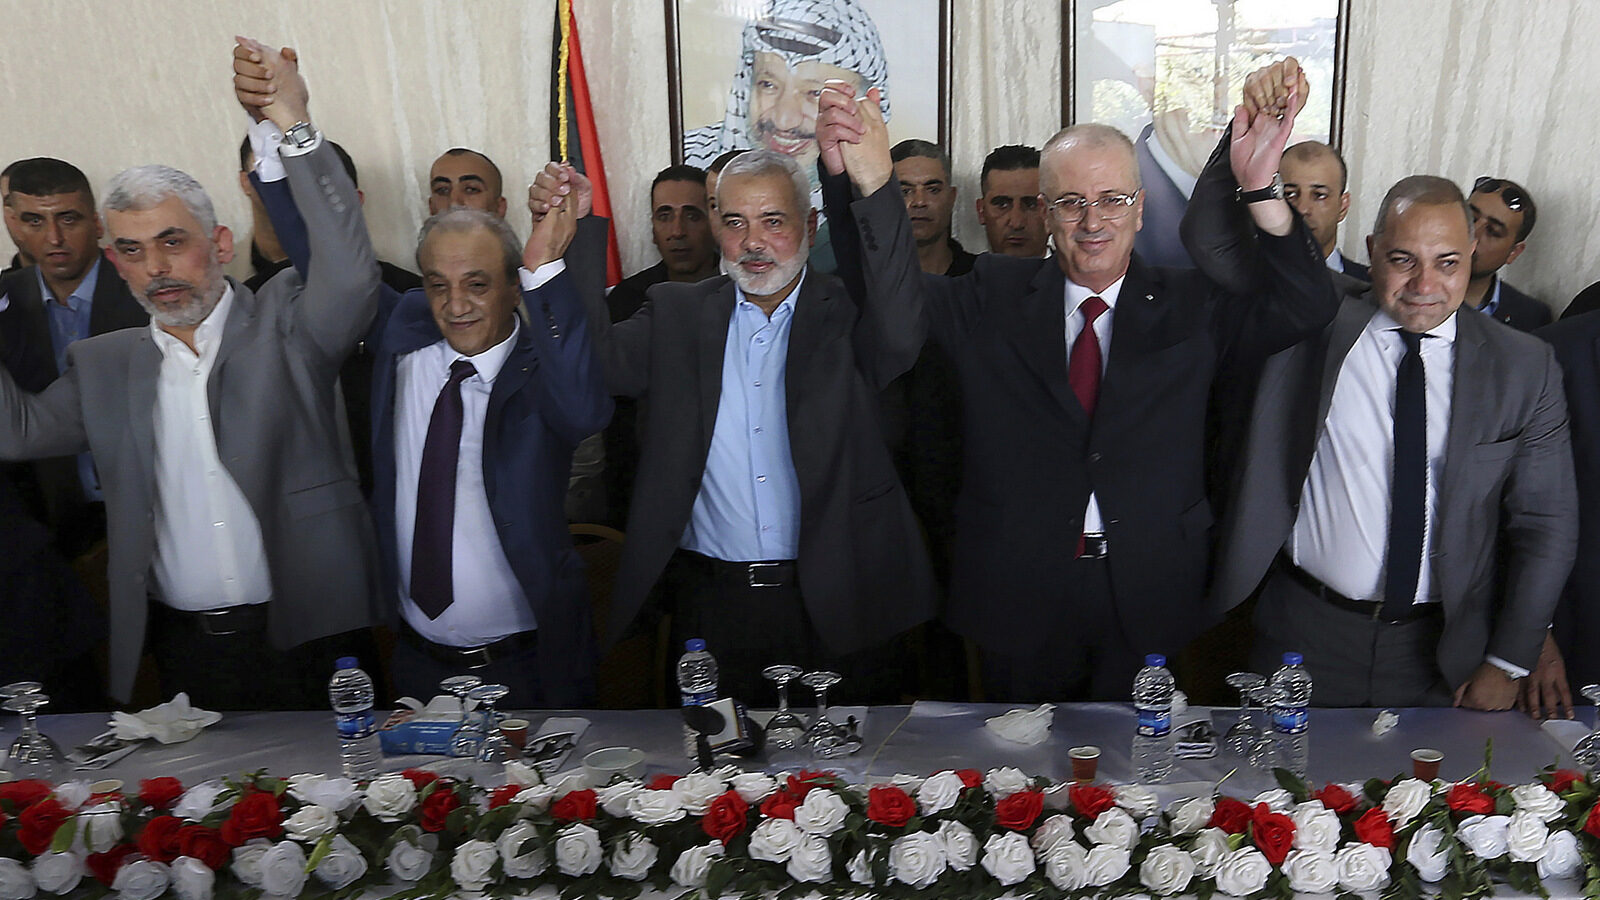 From left to right in front row, Hamas leader in the Gaza Strip Yahya Sinwar, Head of Palestinian General Intelligence Majid Faraj, Head of the Hamas political bureau Ismail Haniyeh, Palestinian Prime Minister Rami Hamdallah and an Egyptian mediator hold their hands up during a meeting in Gaza City, Monday, Oct. 2, 2017. (AP/Prime Minister Office)